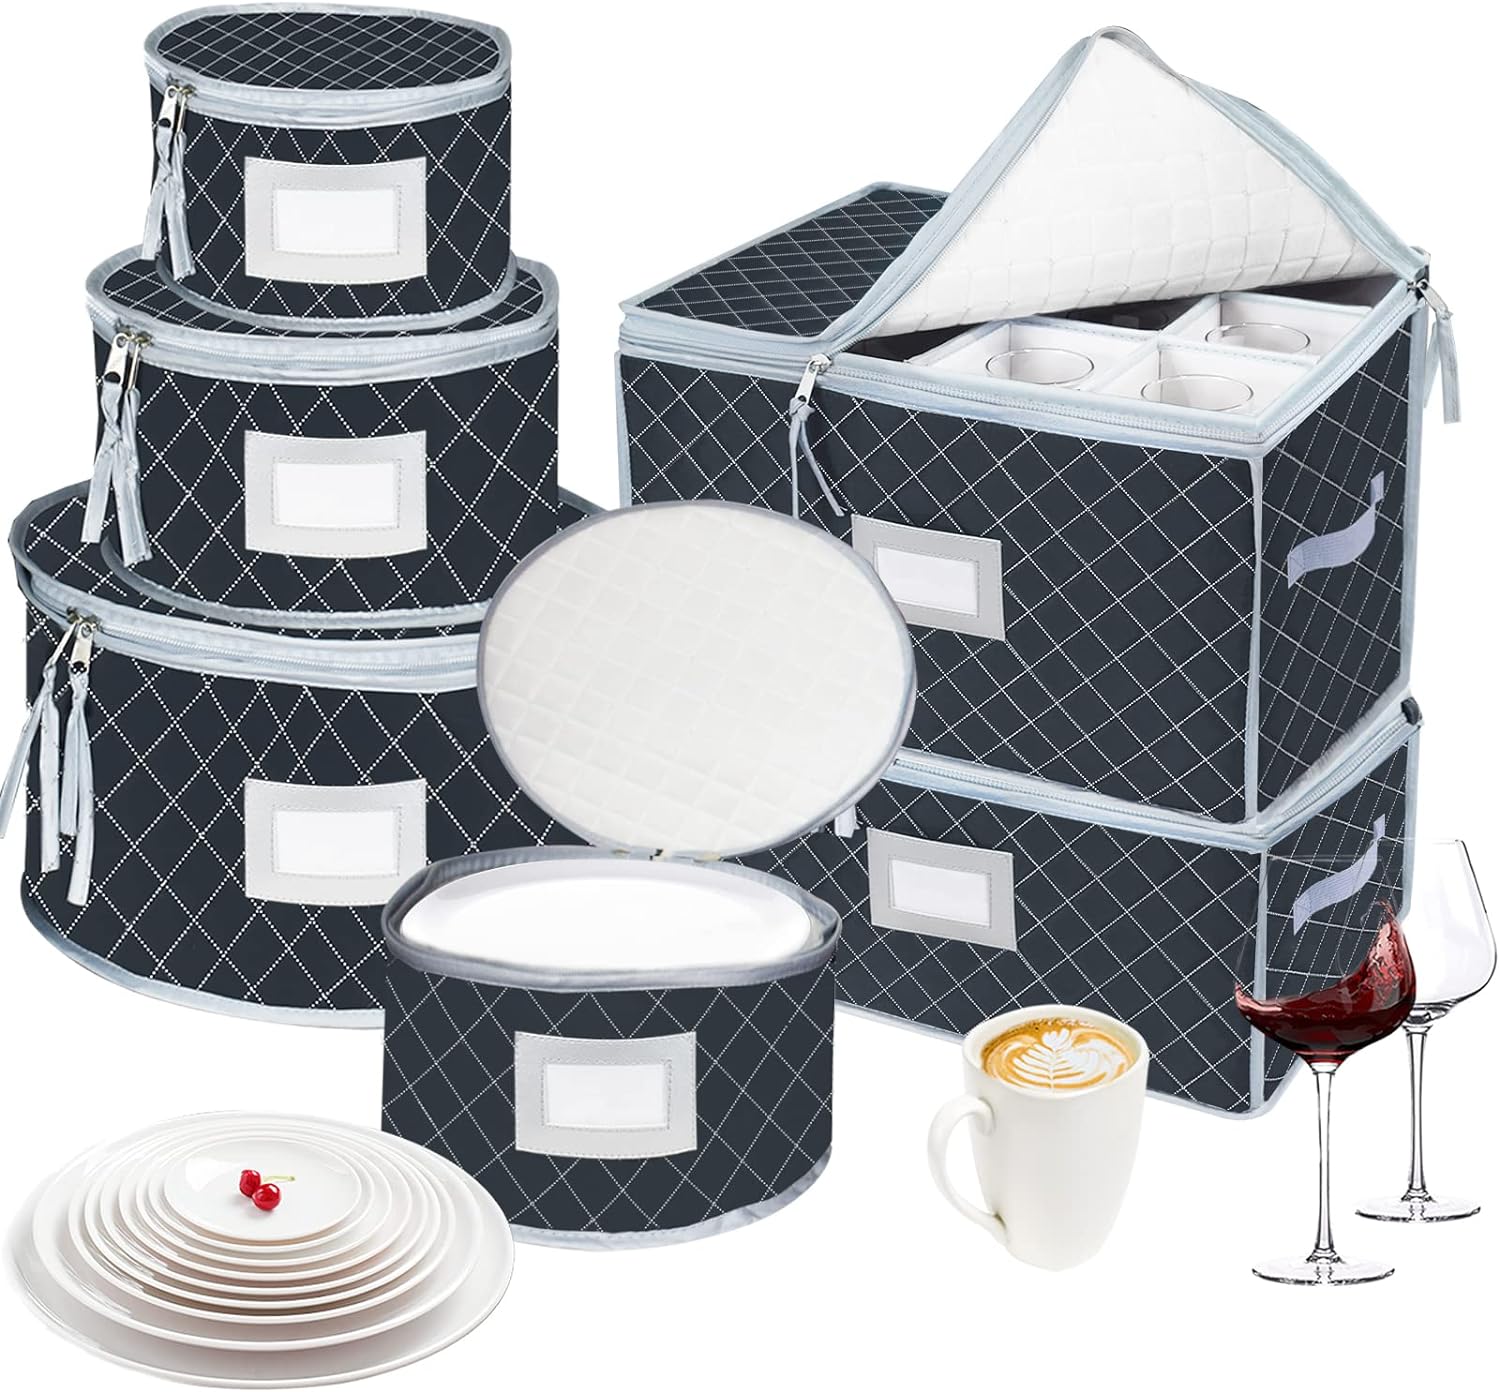 Dinnerware is an essential part of any home, but it can be difficult to store properly. Our dinnerware storage solutions are the perfect way to keep your dishes safe and organized